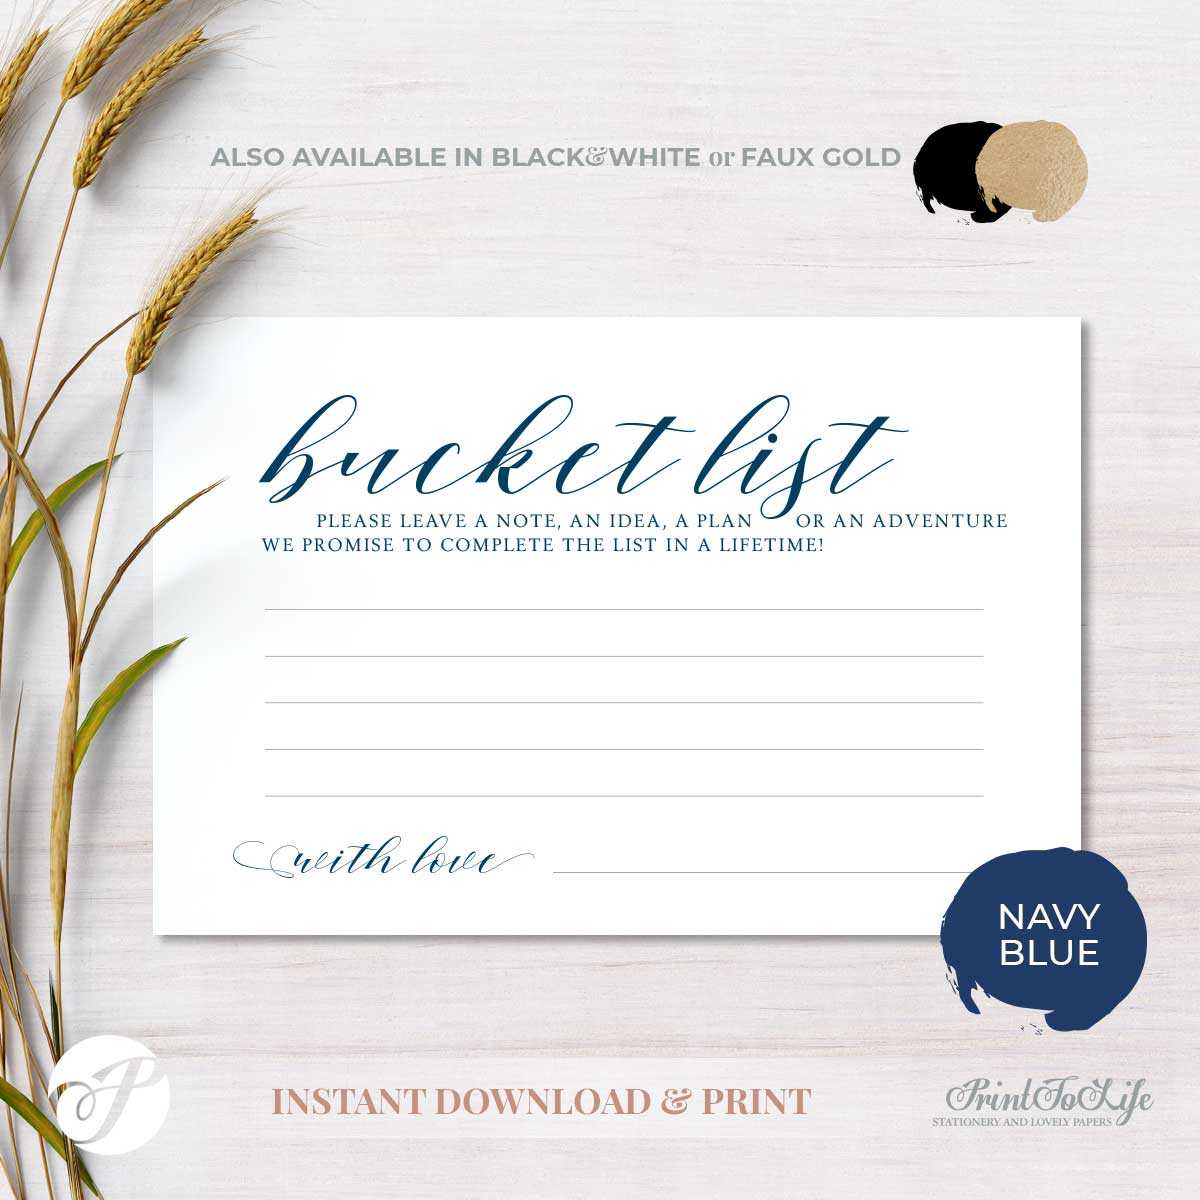 Bucket List Card, Wedding Advice Card, Navy Blue, #mrandmrs Collection With Marriage Advice Cards Templates